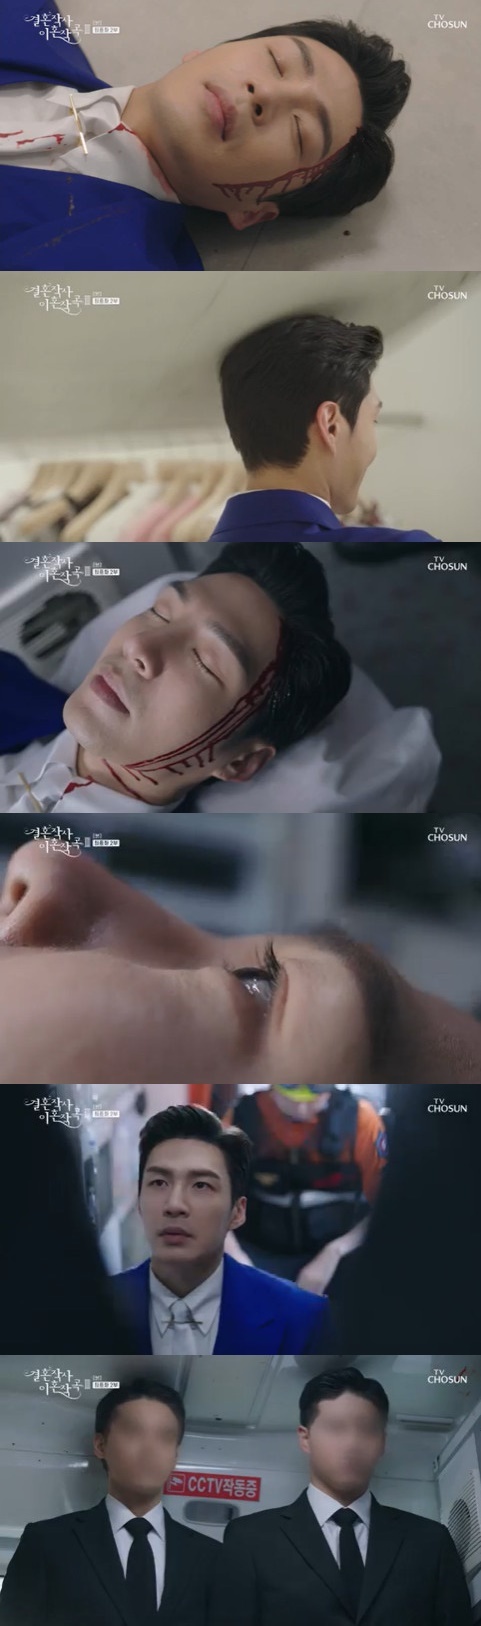 Seoul = = In Gongsakgok 3, the father was seriously injured in a collapse accident.On TV Chosun (TV CHOSUN) weekend drama Divorce Composition 3 of Marriage Writing (Im Sung-han), directed by Oh Sang-won Choi Young-soo, and hereinafter, Gongsong 3, which was broadcast on the afternoon of the 1st, Seo Ban (Moon Seong-ho) declared that he would be divided into his father, Seo (Han Jin-hee).I do not feel comfortable discriminating. My wife does not know what to do because she is beautiful.I do not want to be good and dull, he said. I only want a cup of water, I want my mother to take my card and jewel ring.I was tickling my mouth, but I dont want you to tell me. I have a baby. Can you keep it? The ring is a baby.I think youd hate it if you give it to Uram Ami, he said. Its a slope. Ive heard a baby in decades. The West Ban also celebrated Safiyoung (Park Joo-mi)s pregnancy.Ami (Song Ji-in) told Shin Yu-shin (Ji Young-san) the truth of Shin Ki-rim (Noh Joo-hyun)s death, and said that Kim Dong-mi (Lee Hye-sook) should be sent to a mental hospital.However, Shin Yusin wanted to believe Kim Dong-mi, who played a mother role for him since he was 7 years old, and was distressed.Ami said that Shin Yu-shin was overly obsessed with Kim Dong-mi, and Shin Yu-shin questioned Kim Dong-mi after he was worried that he had pretended not to know when Shin Ki-rim had a heart attack.But Kim Dong-mi did not answer, but he was defeated. After that, Shin Yu-shin called the mental hospital staff and went to the hospital. Kim Dong-mi said, What did I do? Die? Die in front of my eyes?Ill die in your hand. In your hand. Not anyone else. How you do it. Then he said, Im wrong. Now Ill do it, Yusin. One son. I cant.But he was taken to the hospital. Shin Yu-shin, who looked down at Kim Dong-mi at the hospital, was troubled by the thought of Shin Ki-rim.Panmunho (Kim Eung-soo) and So Ye-jeong (Lee Jong-nam) advised their son, Judiciary Hyun (Kang Shin-hyo), to live with Bo Hye-ryong (Lee Ga-ryeong).But after losing his child, he suffered from severe depression, and began to doubt the relationship between Judge and Ami because of his obligatory illness.After that, Panmunho doubted the recruits of Buhye-ryong, and Buhye-ryong was anxious to see the baby boy who had not seen anyone alone.Park Hae-ryun (played by Jeon No-min) offered Nam Ga-bin (played by Lim Hye-young) a reunion proposal, but spent a lonely time after failing.He called Ishieun on the excuse of the house, but he was surprised to see his ex-wife, who was unknowingly a wife.Park Hae-ryun said, I want to see my face and listen to the news of the children.Shin Yu-shin (Ji Young-san) faced his ex-wife Safi-young at a hair salon, and he was embarrassed to see Safi-young pregnant and asked to talk to her, but Safi-young turned coldly.After meeting Safiyoung, Ami announced that she was married to Shin Yusin. Safiyoung thanked Ami for living well.The dead lion who stayed at the chairmans house had been gone for a long time. Song Won (Lee Min-young) continued his soul by the western half.I was glad that I was okay, he said. On the other hand, I wanted to be a manager. I was lonely.However, there was a growing anxiety after Seo Dong-ma (Boo Bae) was put on something, and on the day of Safi-youngs birth, Seo Dong-ma visited a womens clothing store and suffered an accident that the ceiling collapsed and injured her head.Seo Dong-ma, who was seriously injured in the head, jumped up and asked the questioning bodyguards standing in front of him, Who are you? At that time, Safi Young was about to give birth.On the other hand, Girl Song 3 is a story about unimaginable misfortune that has been encountered by three charming heroines in their 30s, 40s and 50s.It airs every Saturday and Sunday at 9 p.m.